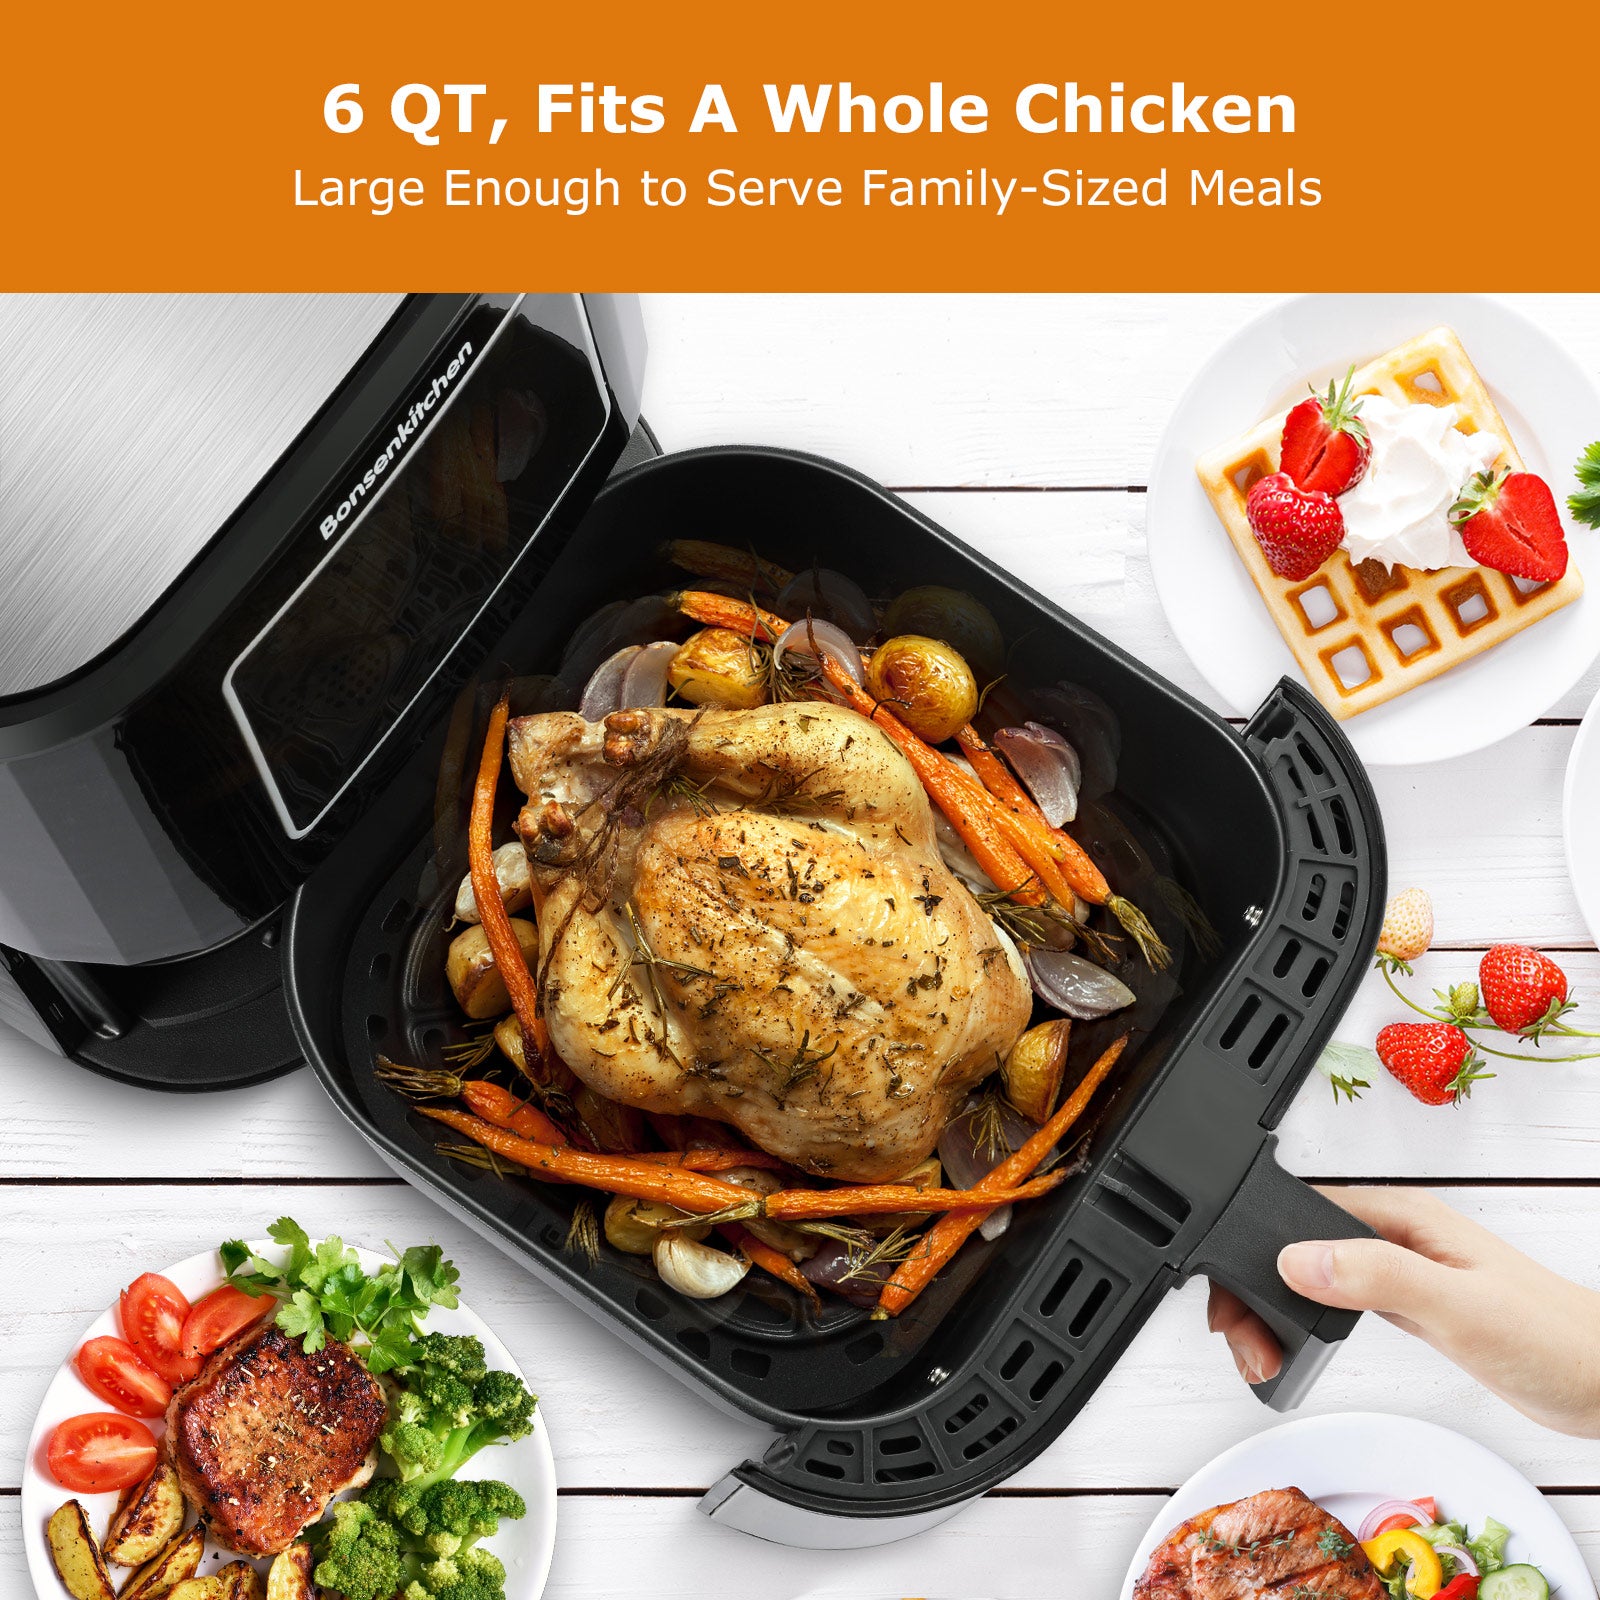 15.3QT Air Fryer Oven Digital 16-in-1 Convection Air Fryer Toaster